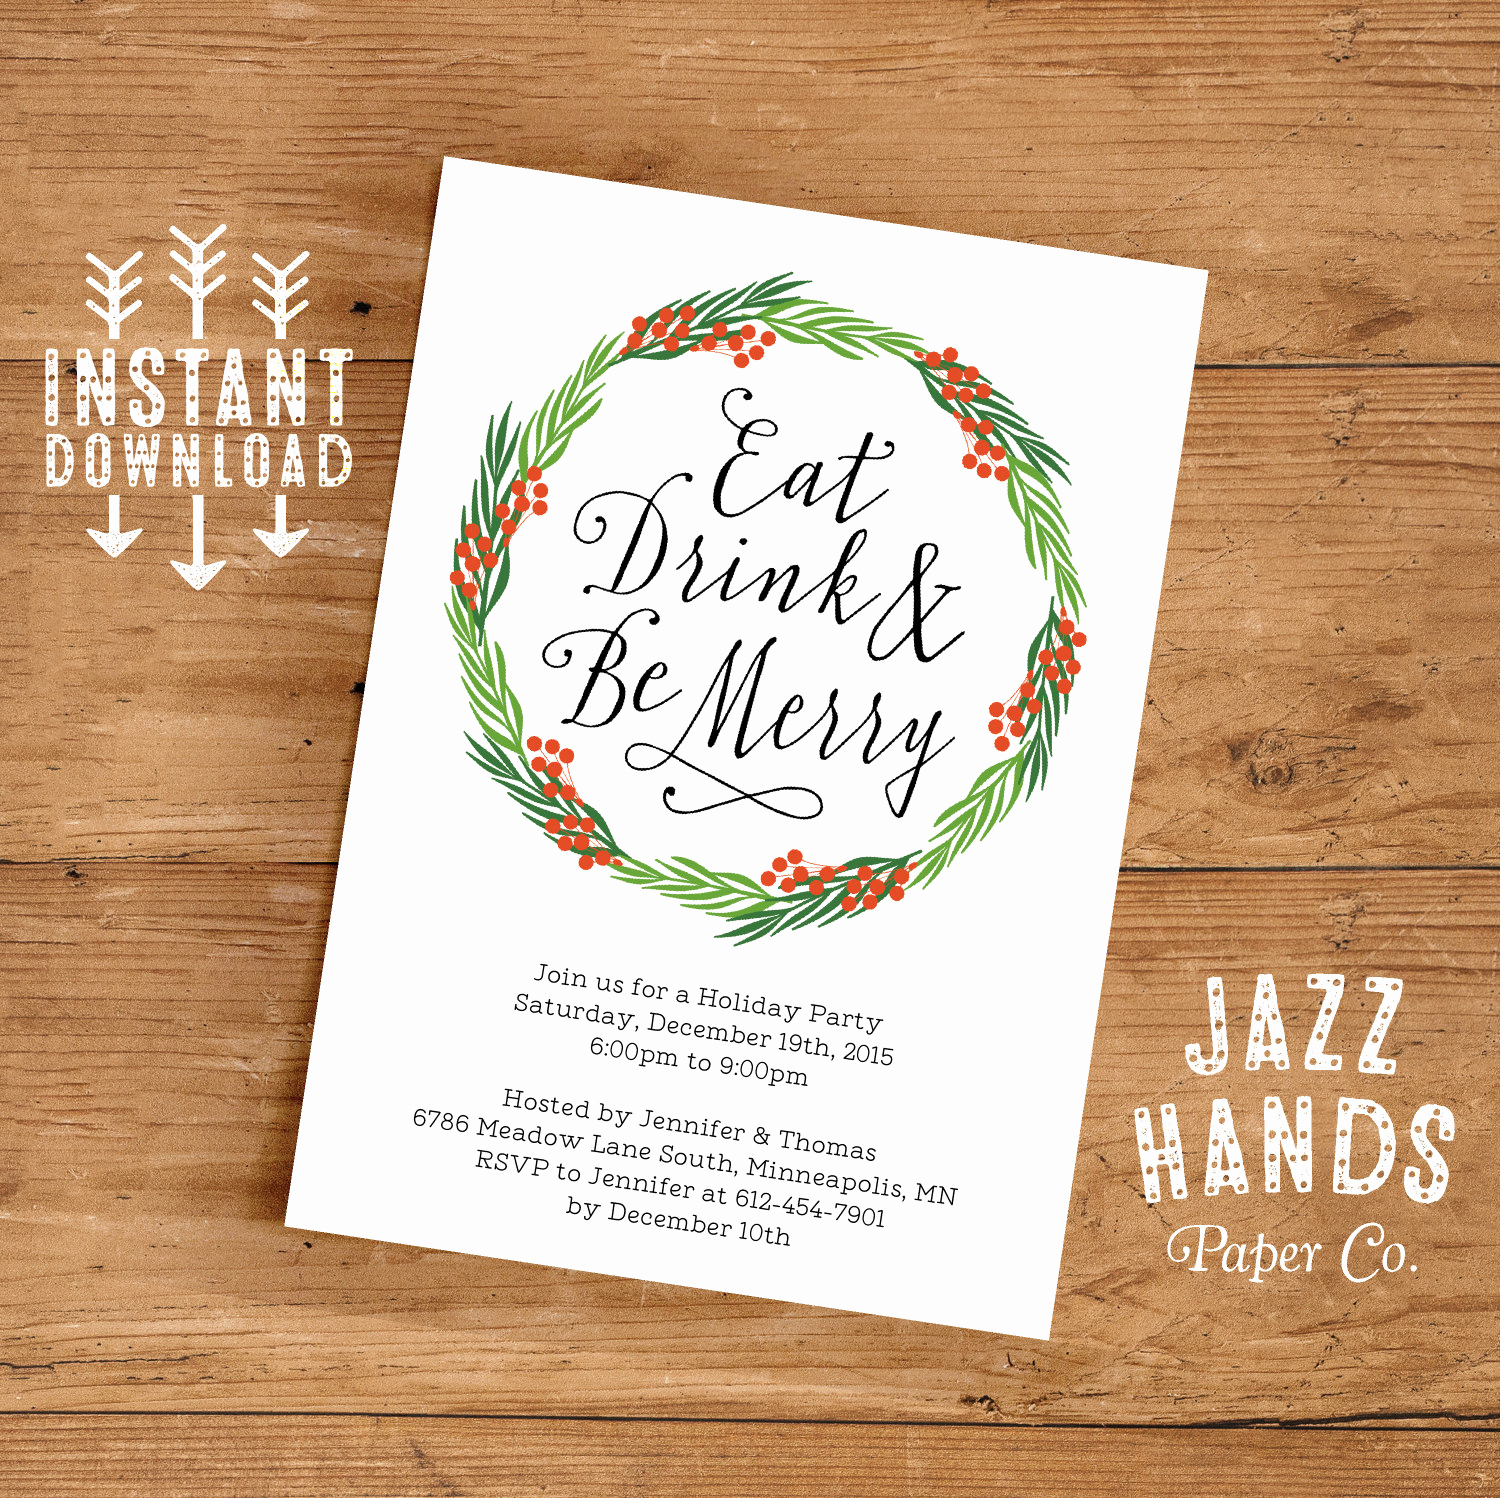 Holiday Party Invitation Template New Eat Drink and Be Merry Invitation Template Diy Printable